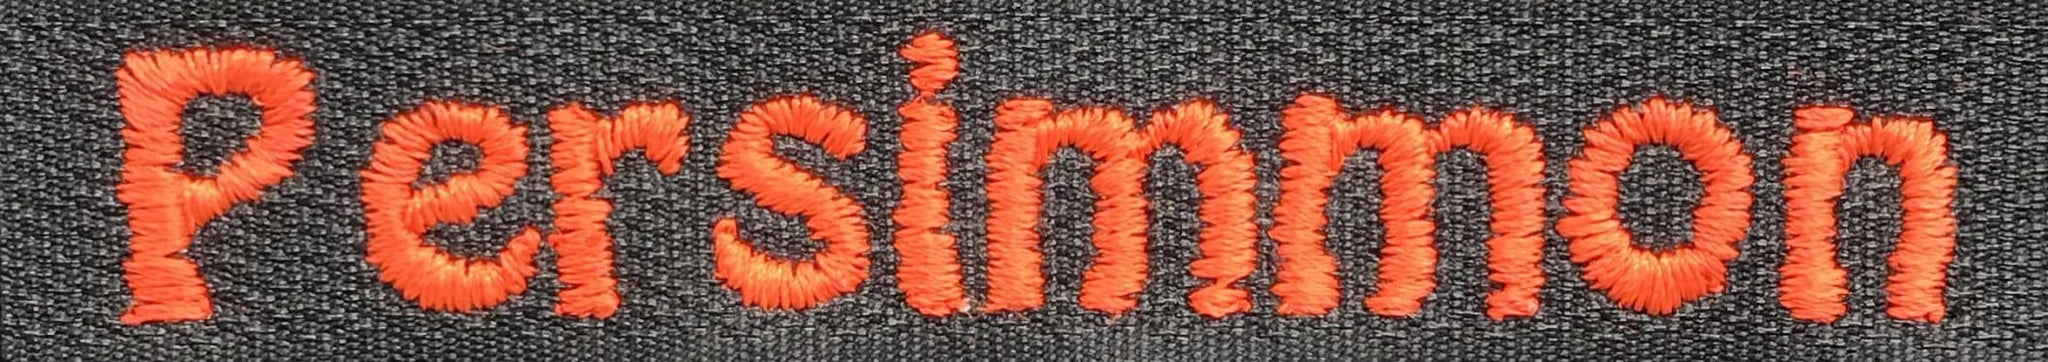 persimmon embroidery example